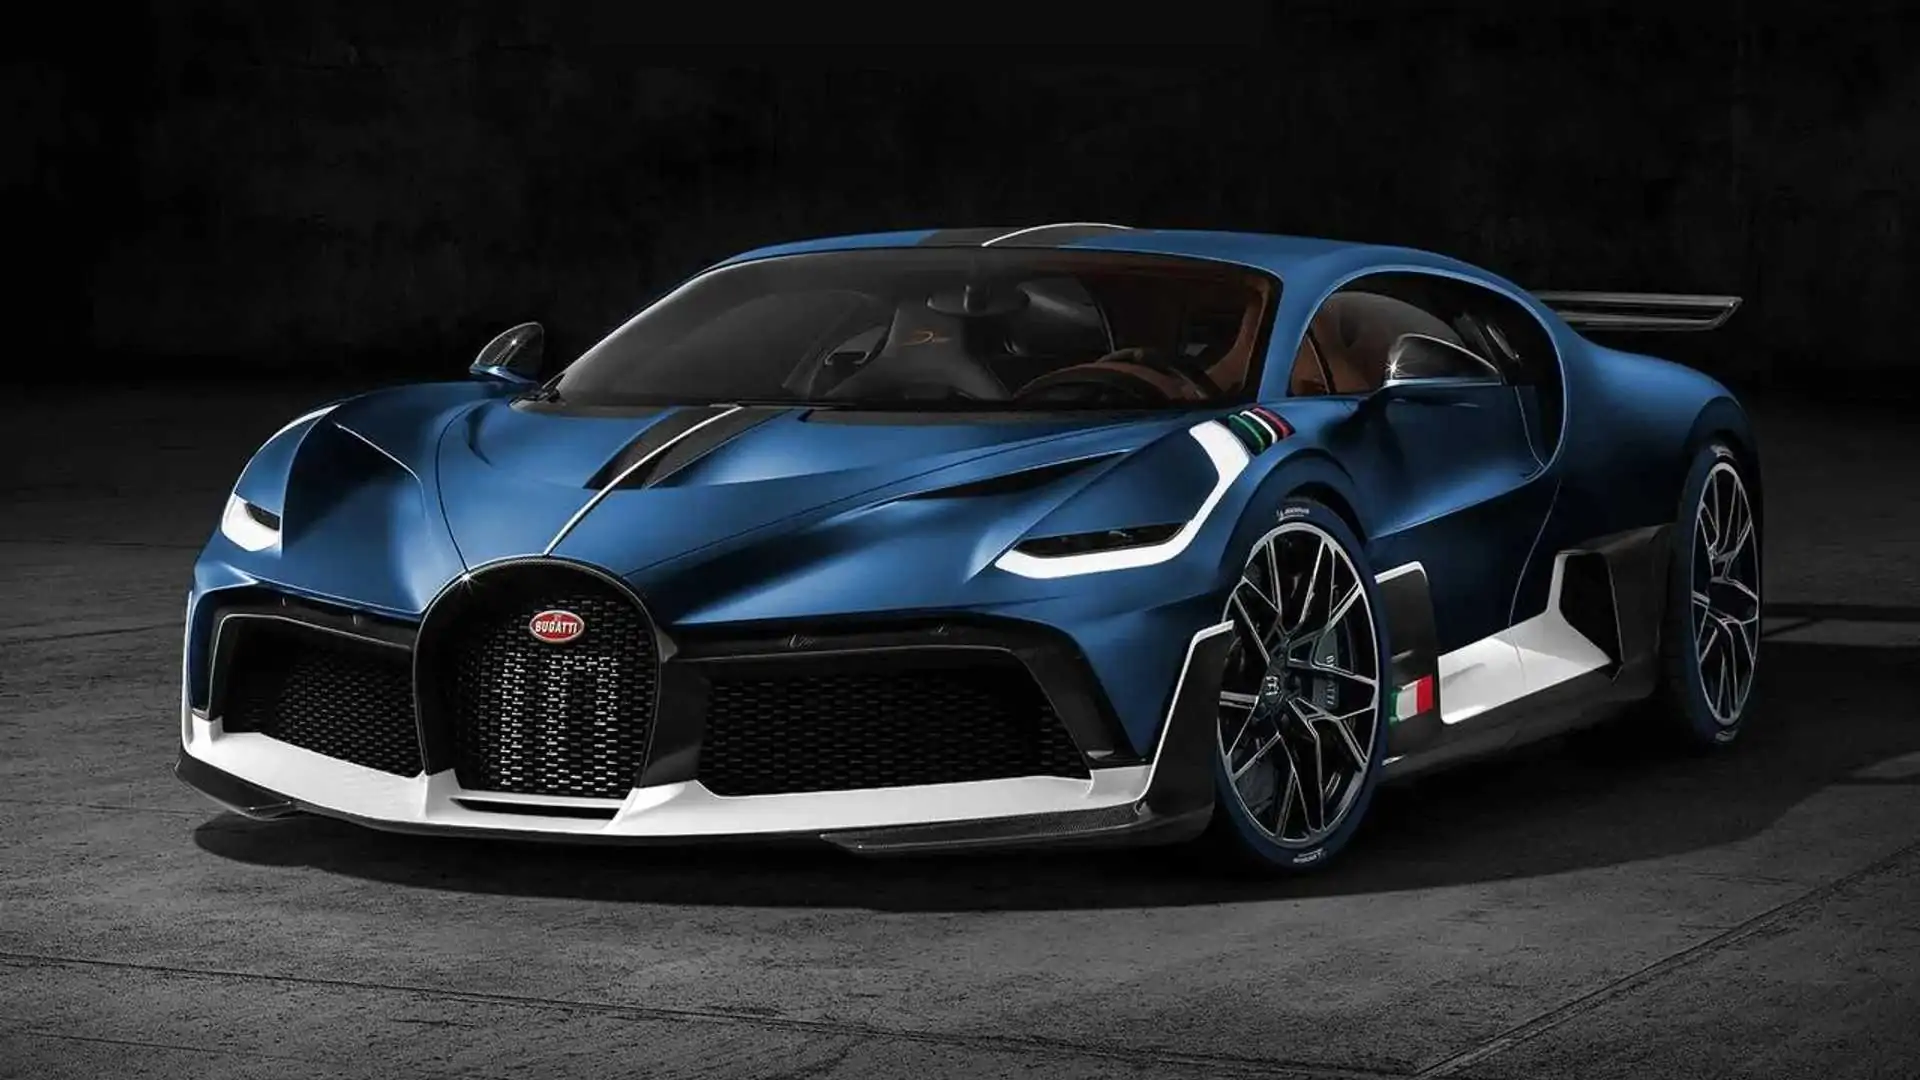 Bugatti Divo Looks Divine Wearing Heritage Paint Jobs [30 Images]